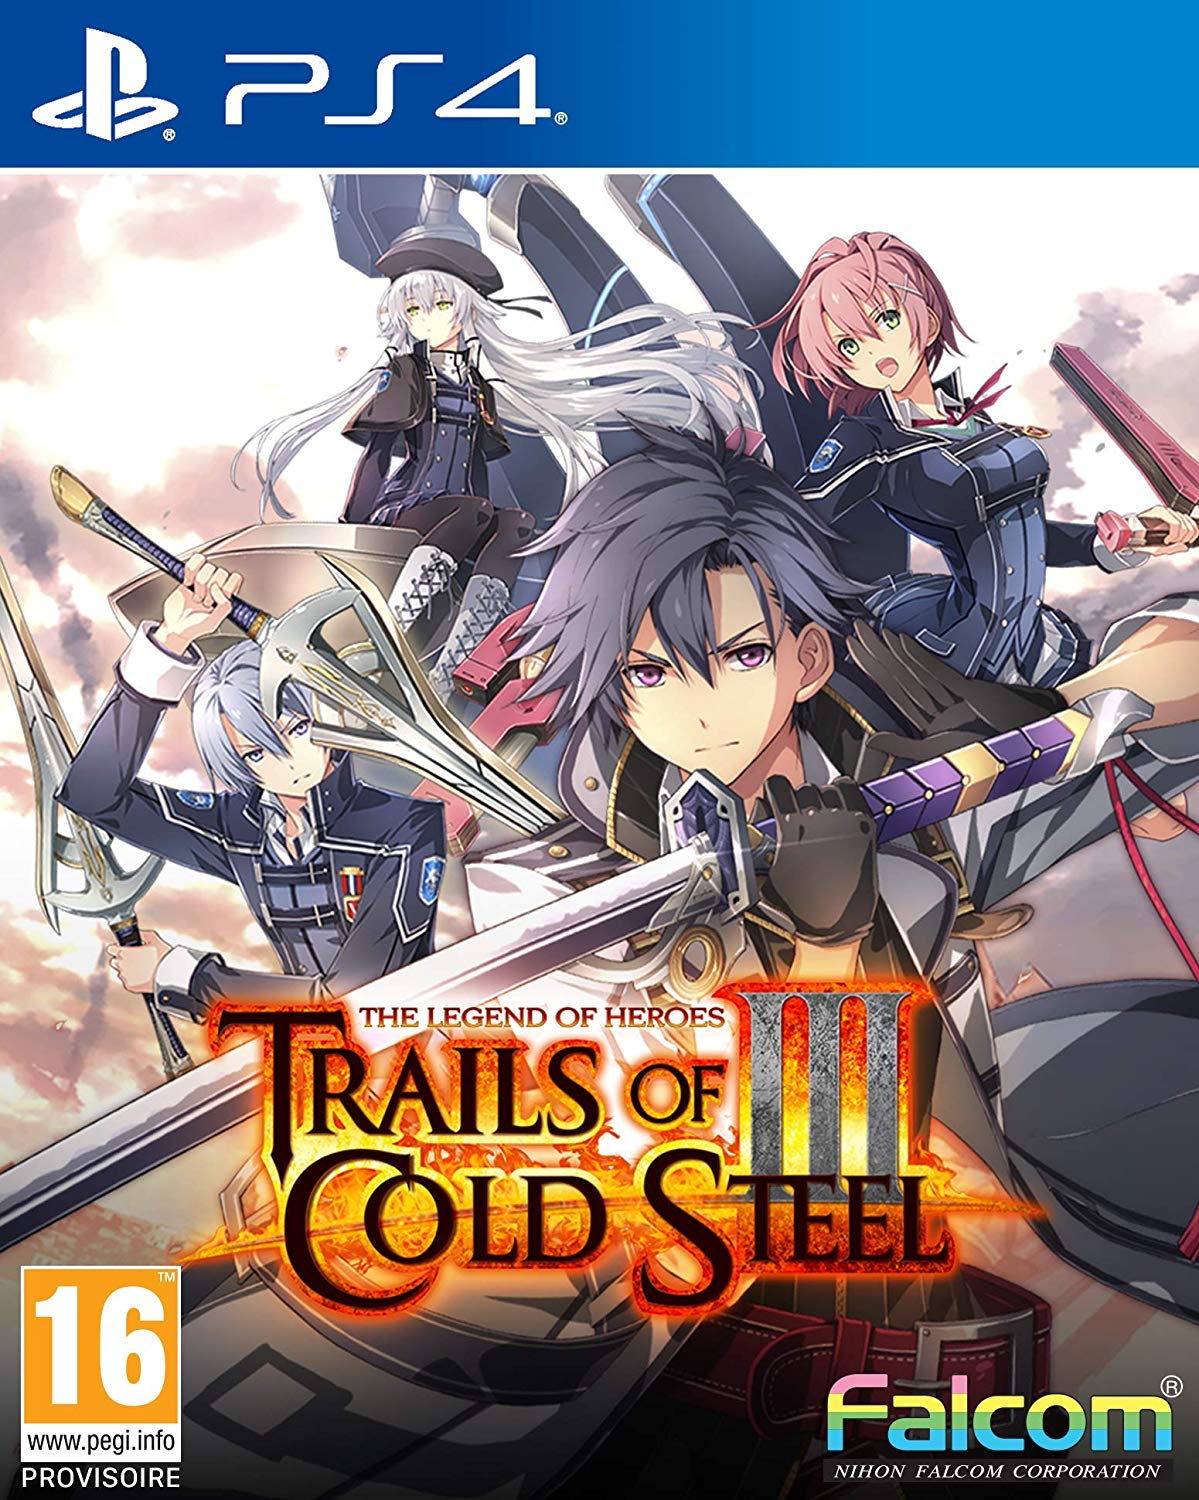 The Legend of Heroes: Trails of Cold Steel III von NIS America